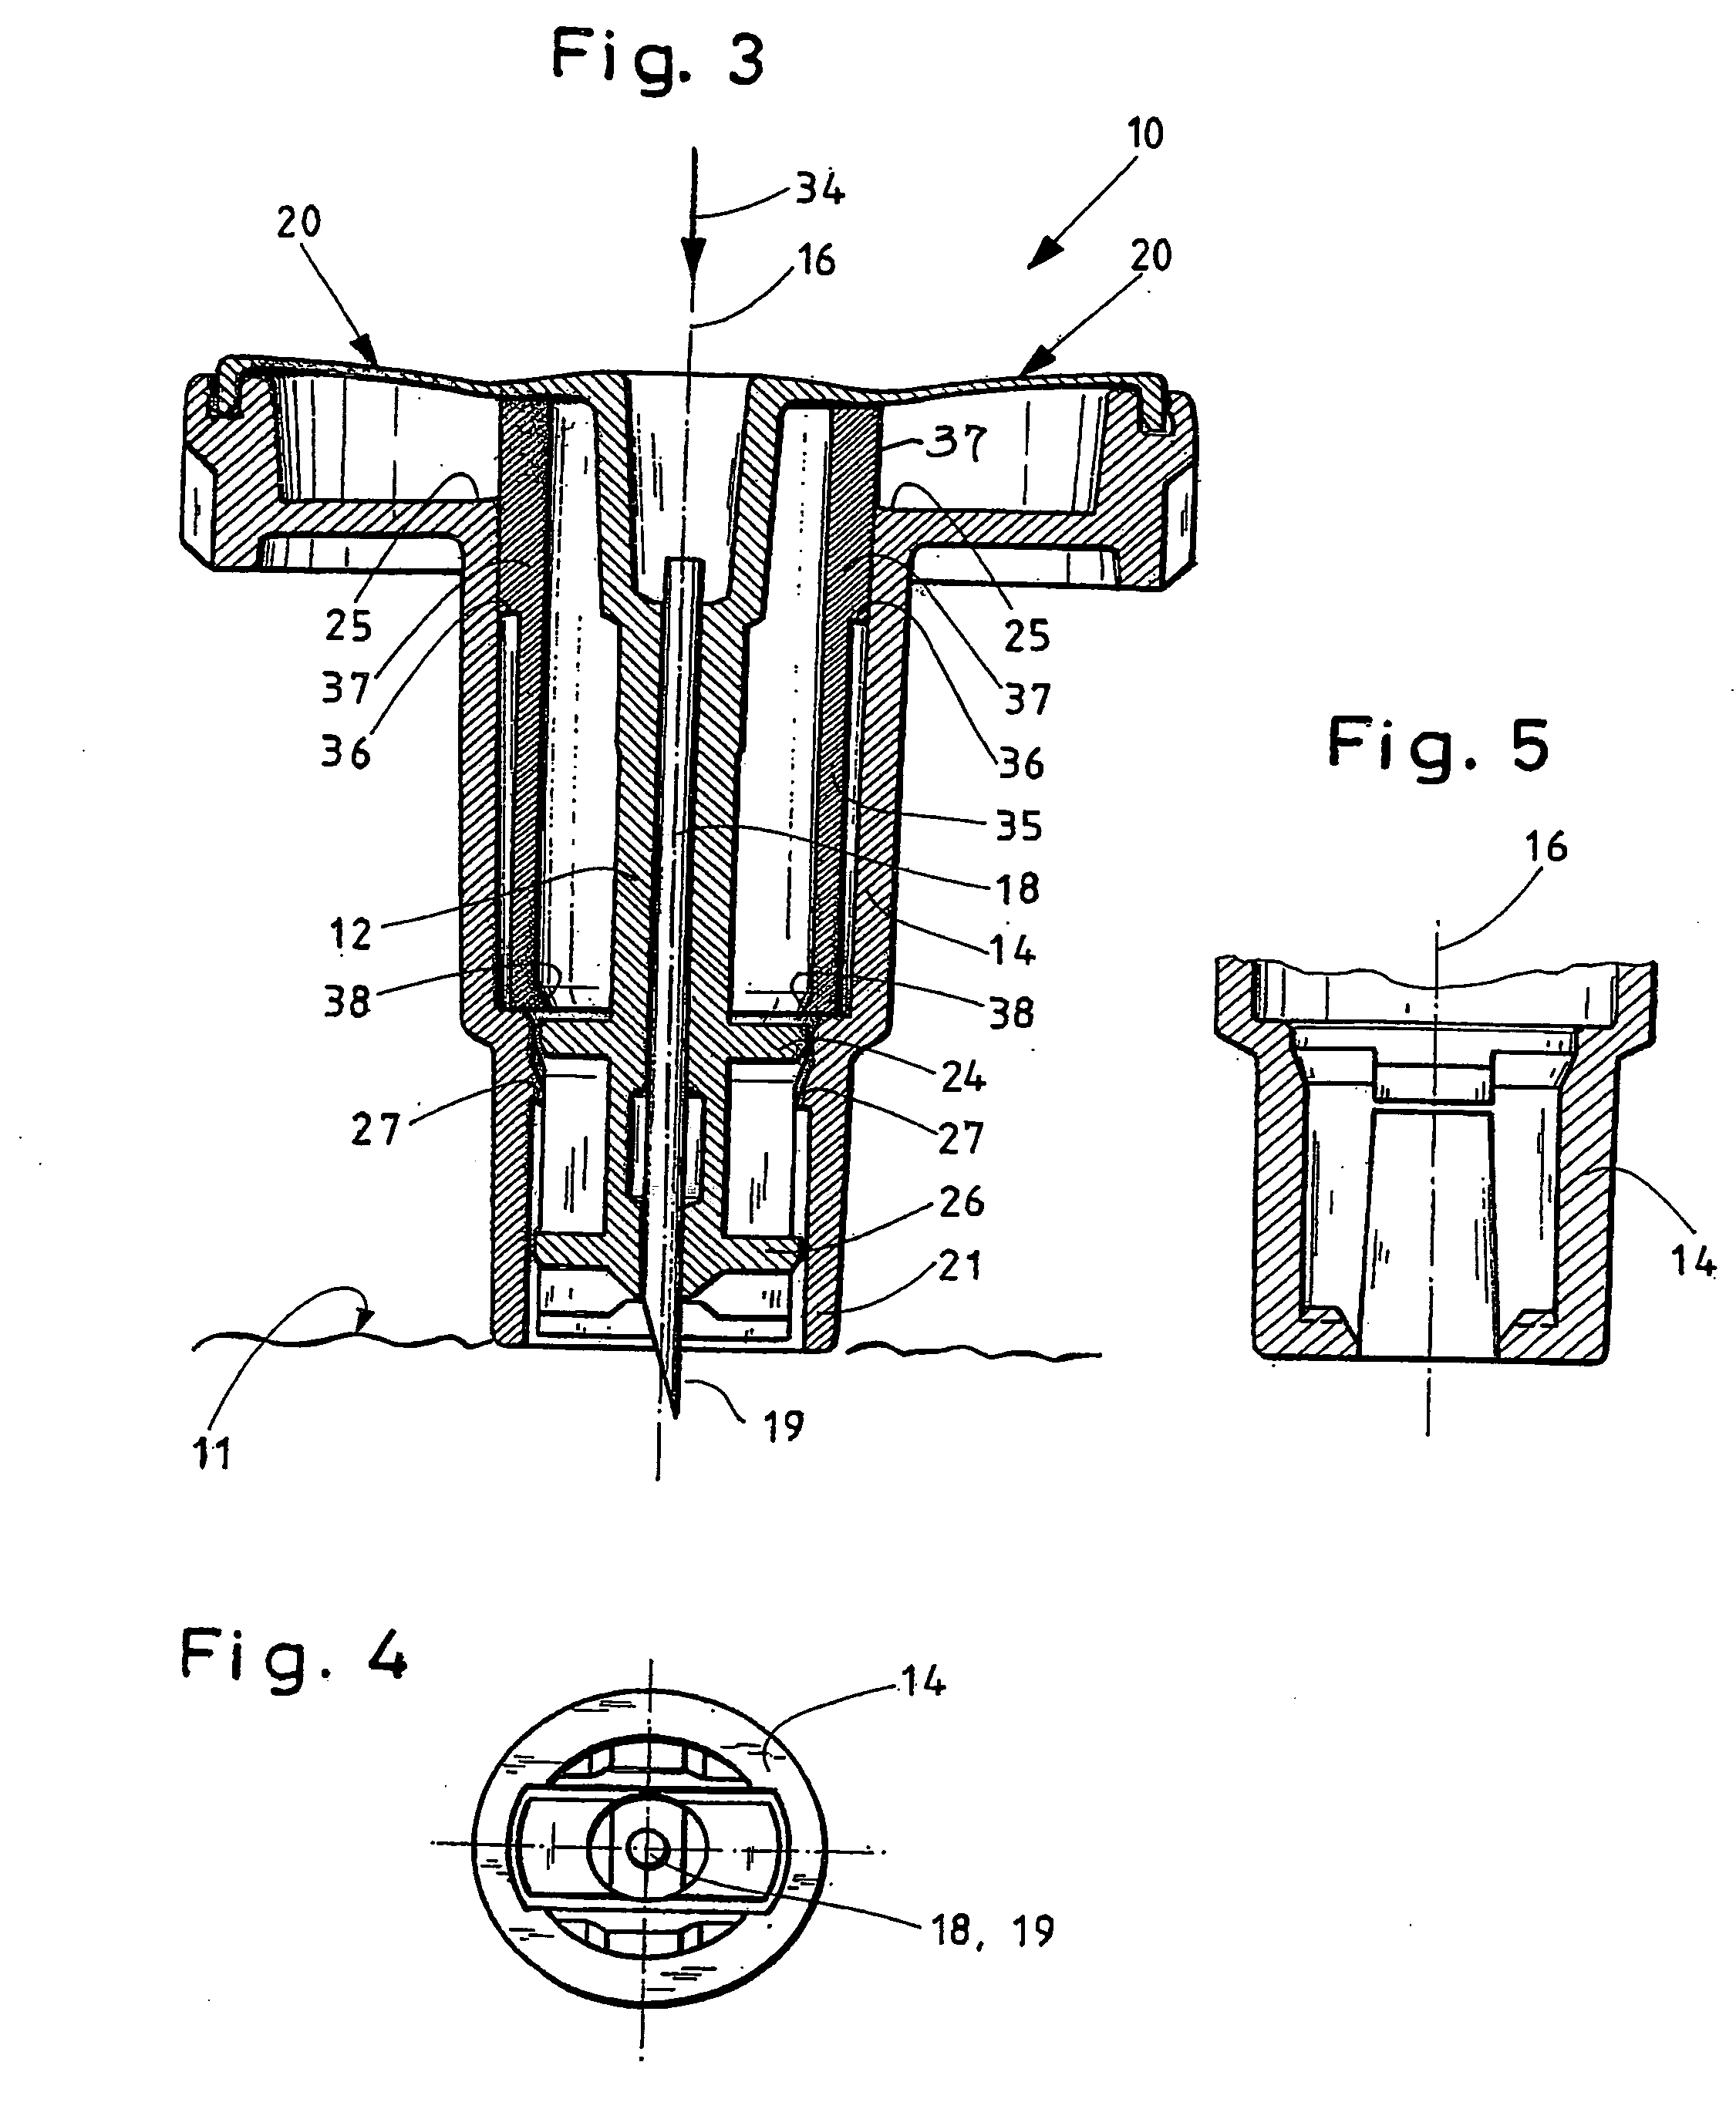 Lancet device for puncturing the skin